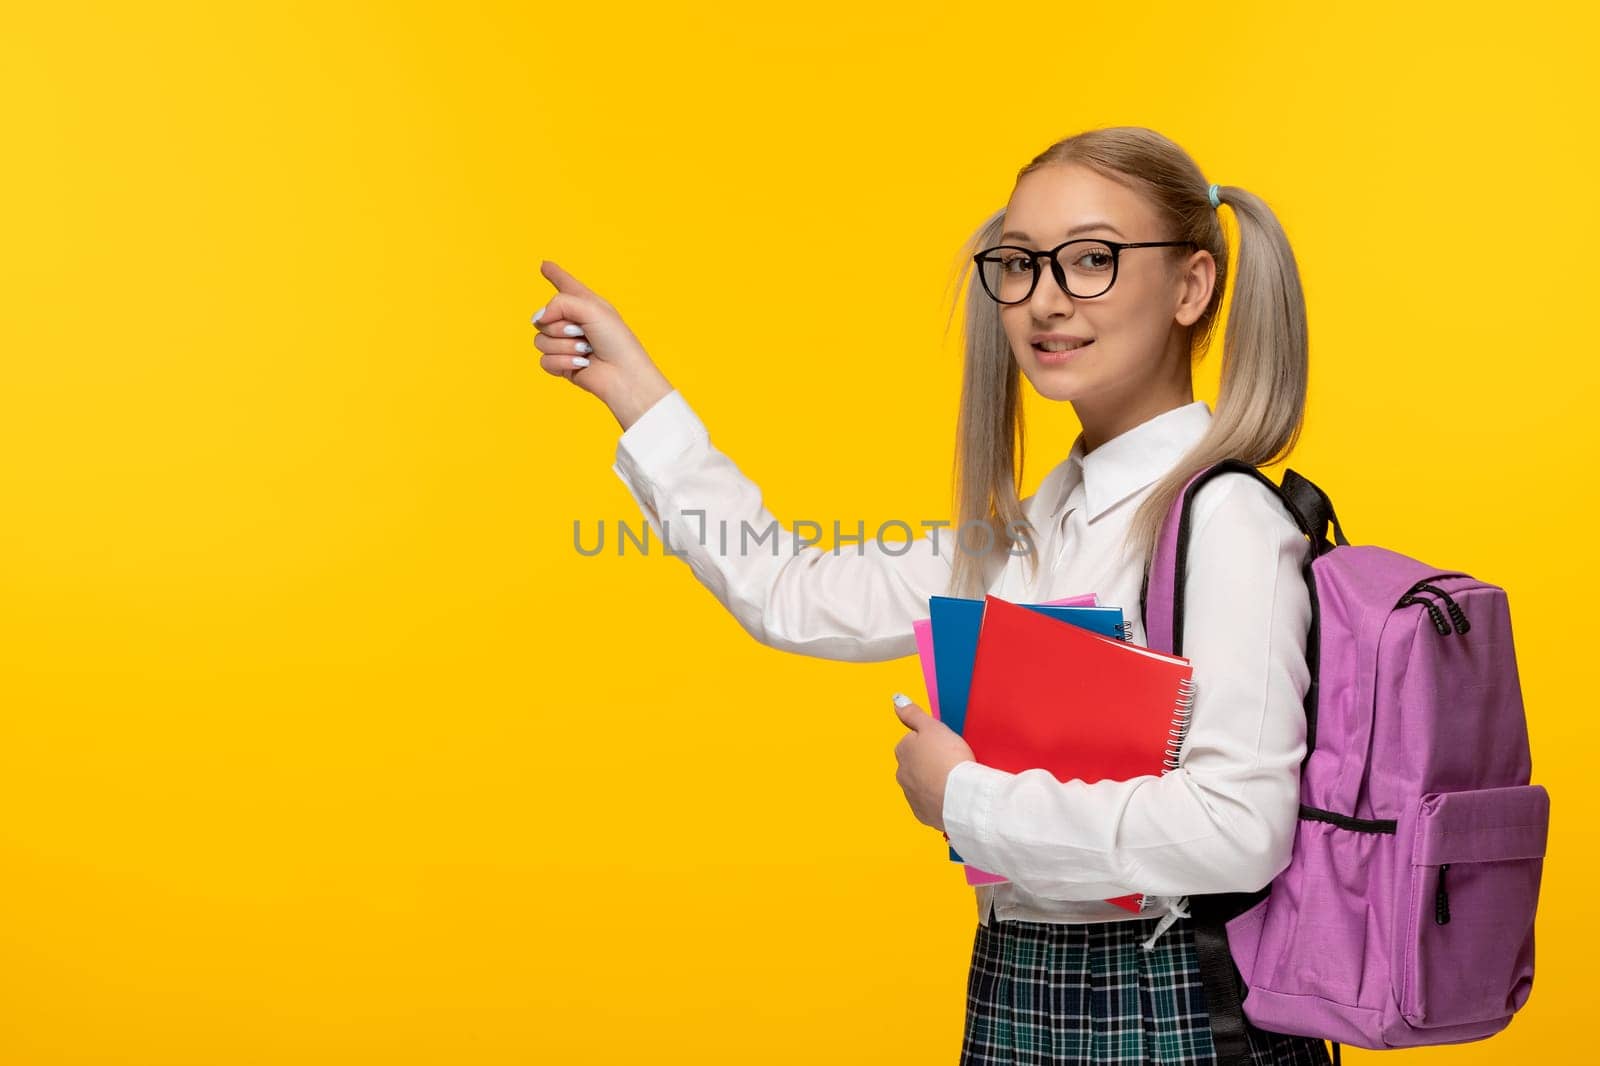 world book day smiling blonde school girl holding colorful notebooks